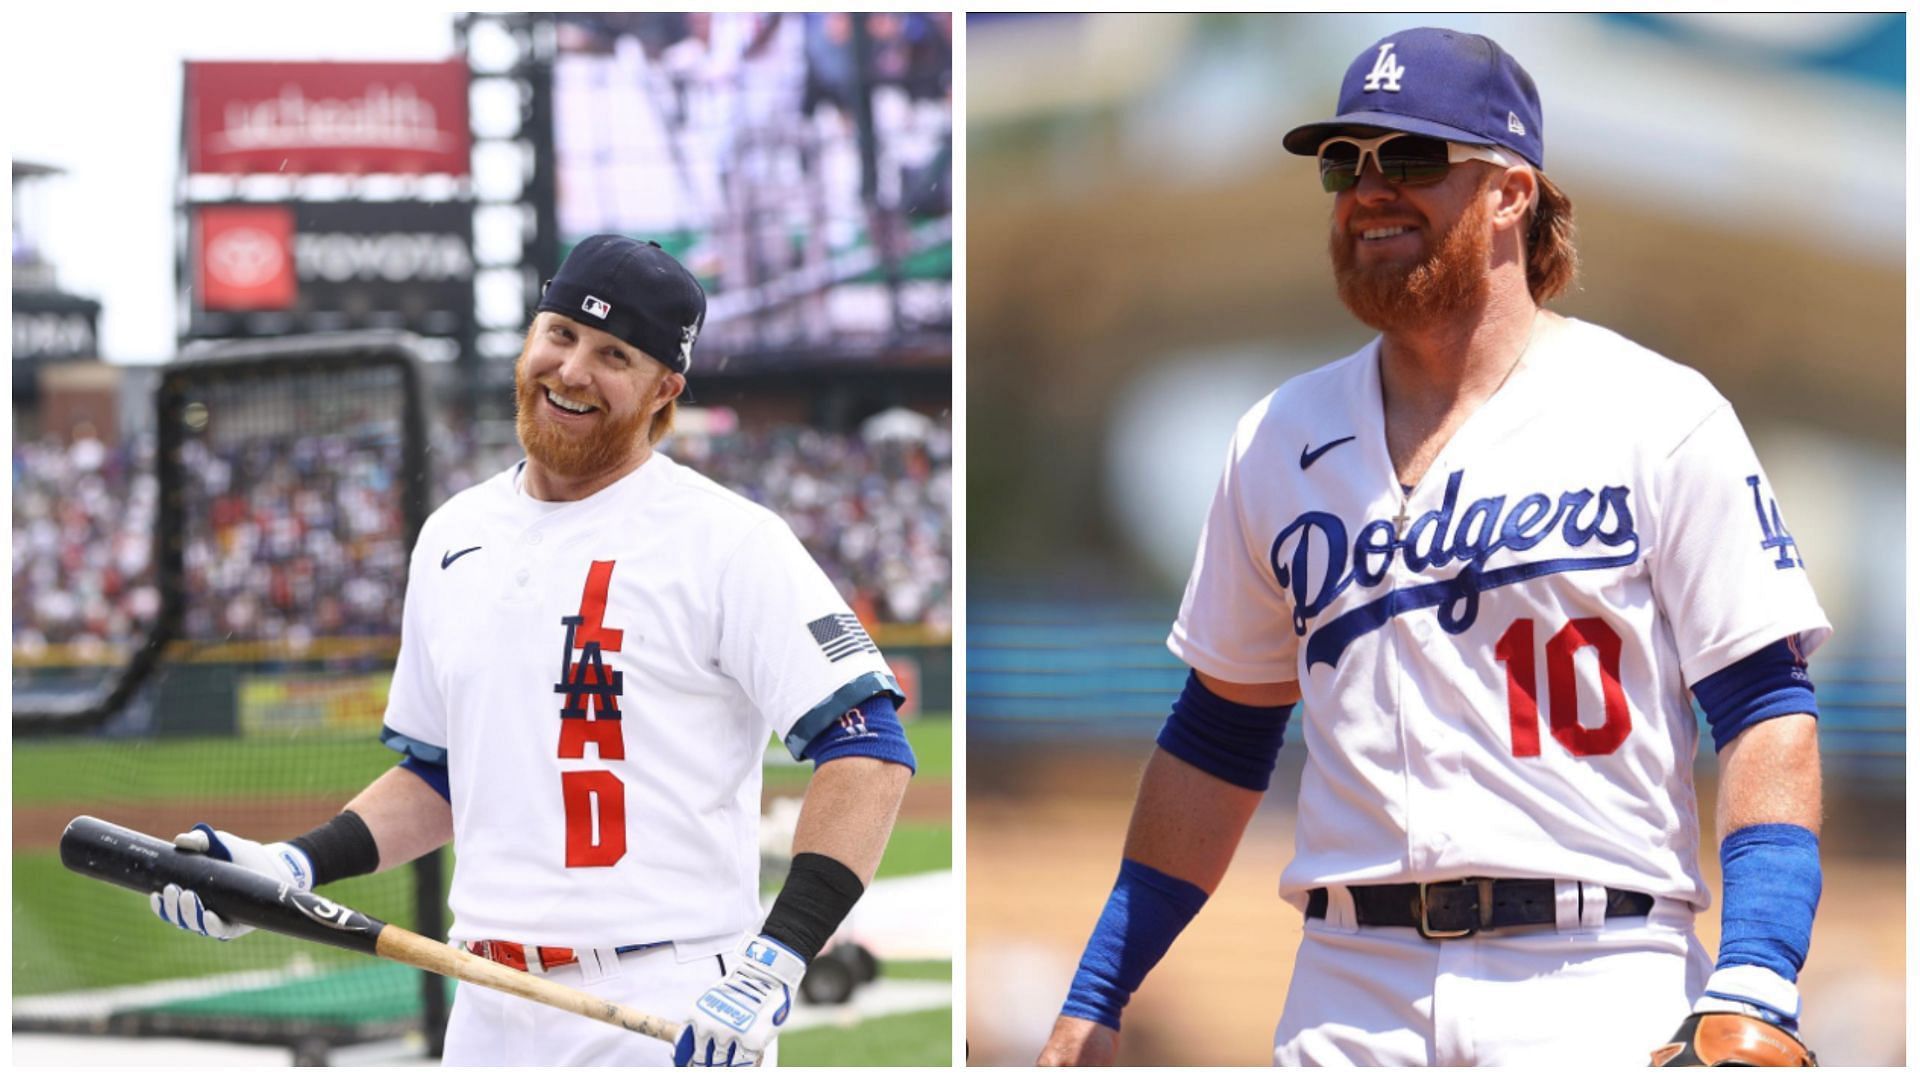 Dodgers' Justin Turner on why he dropped some pounds - Los Angeles